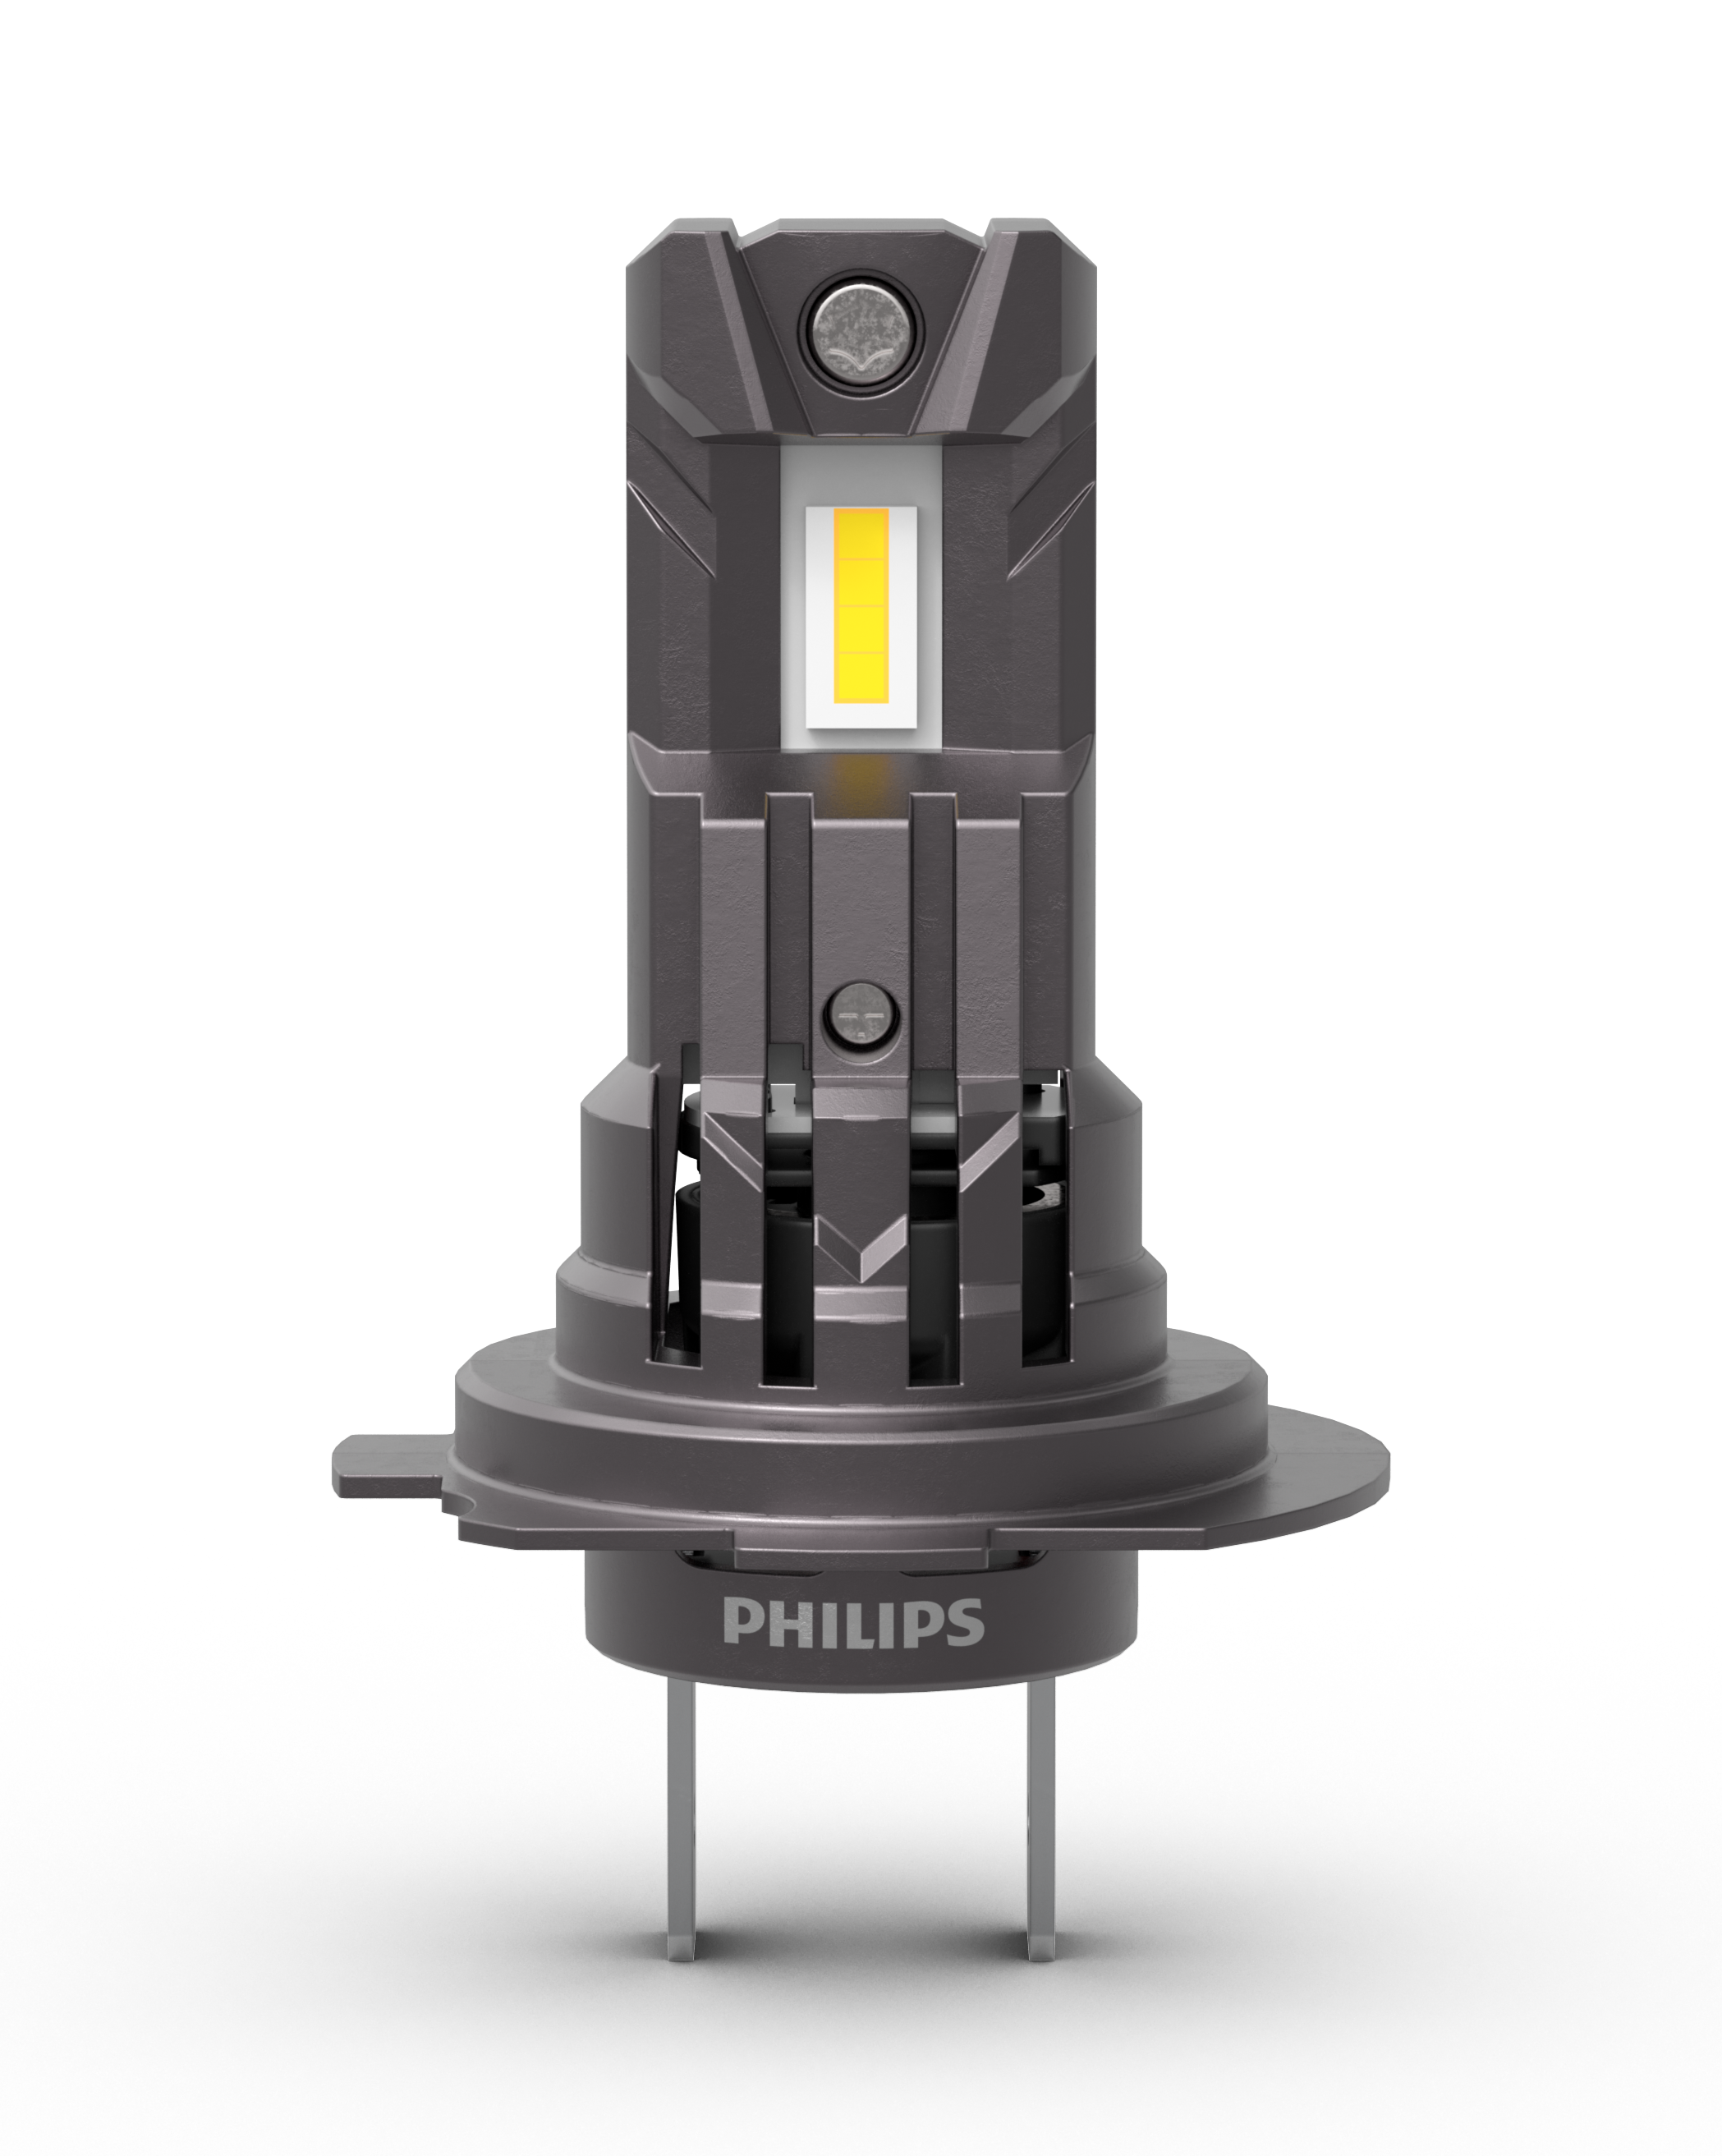 New Philips Ultinon Access makes upgrading to LED headlights